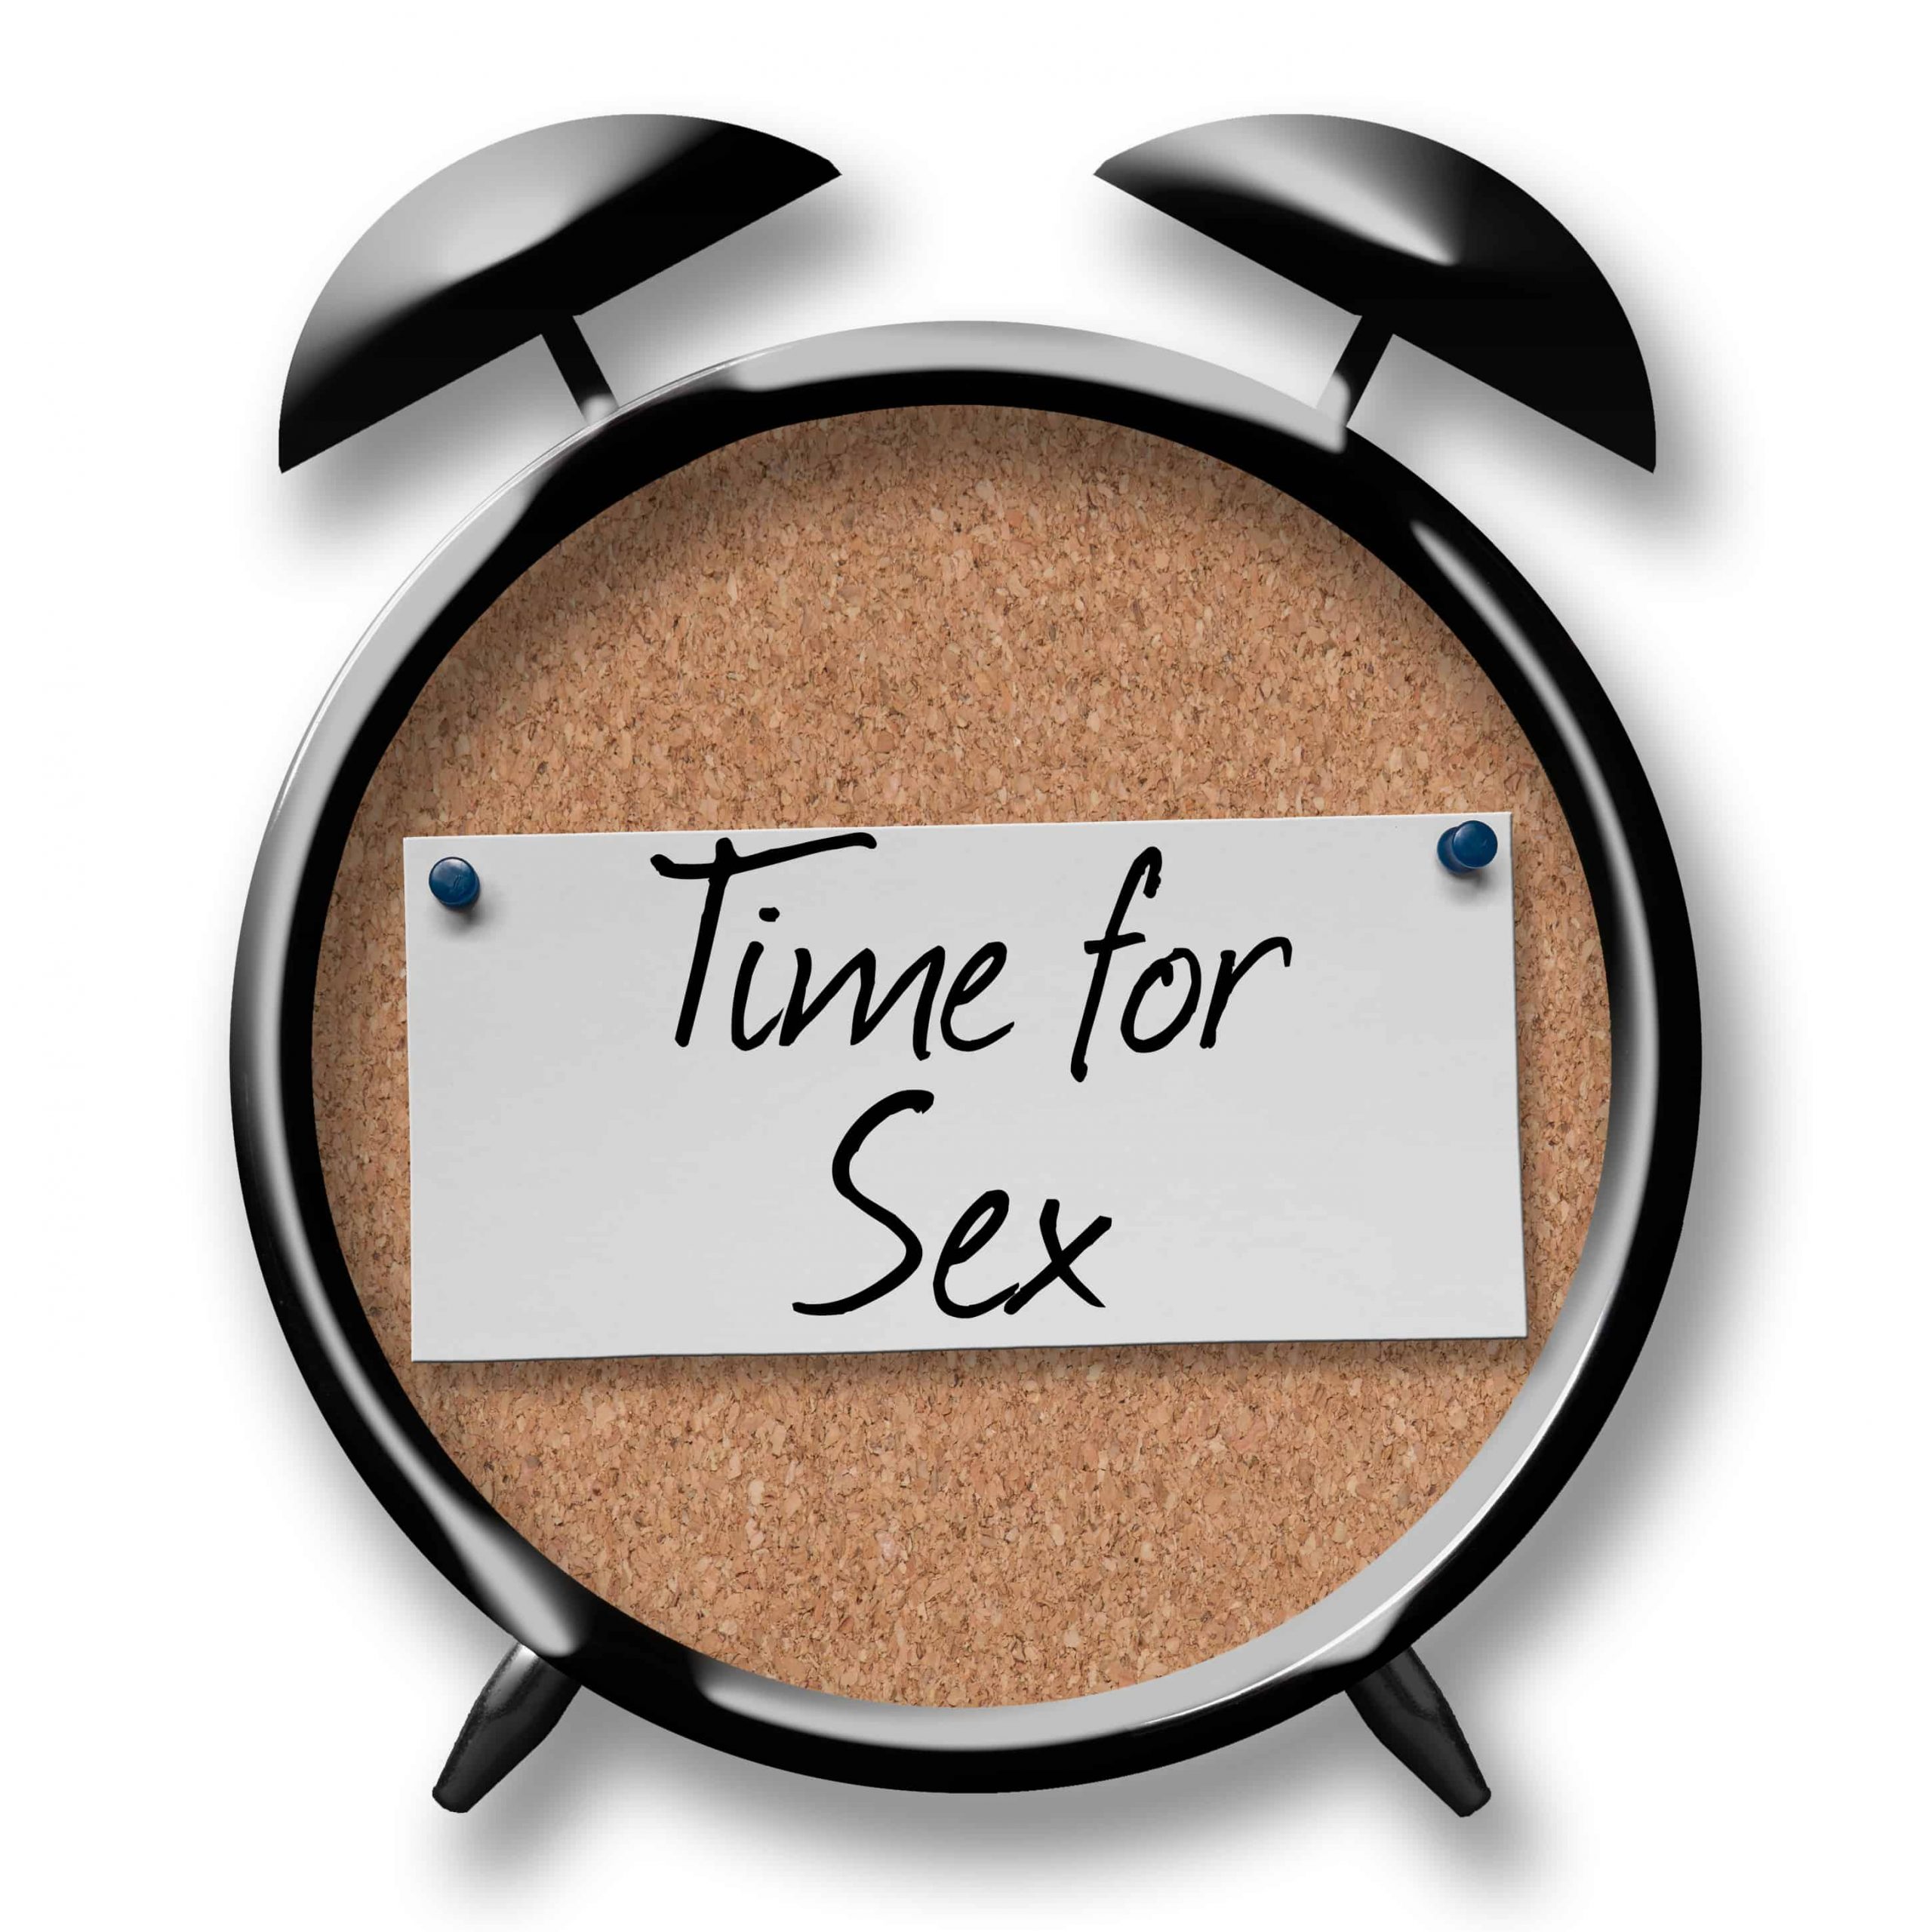 Time for Sex note text on cork board alarm clock